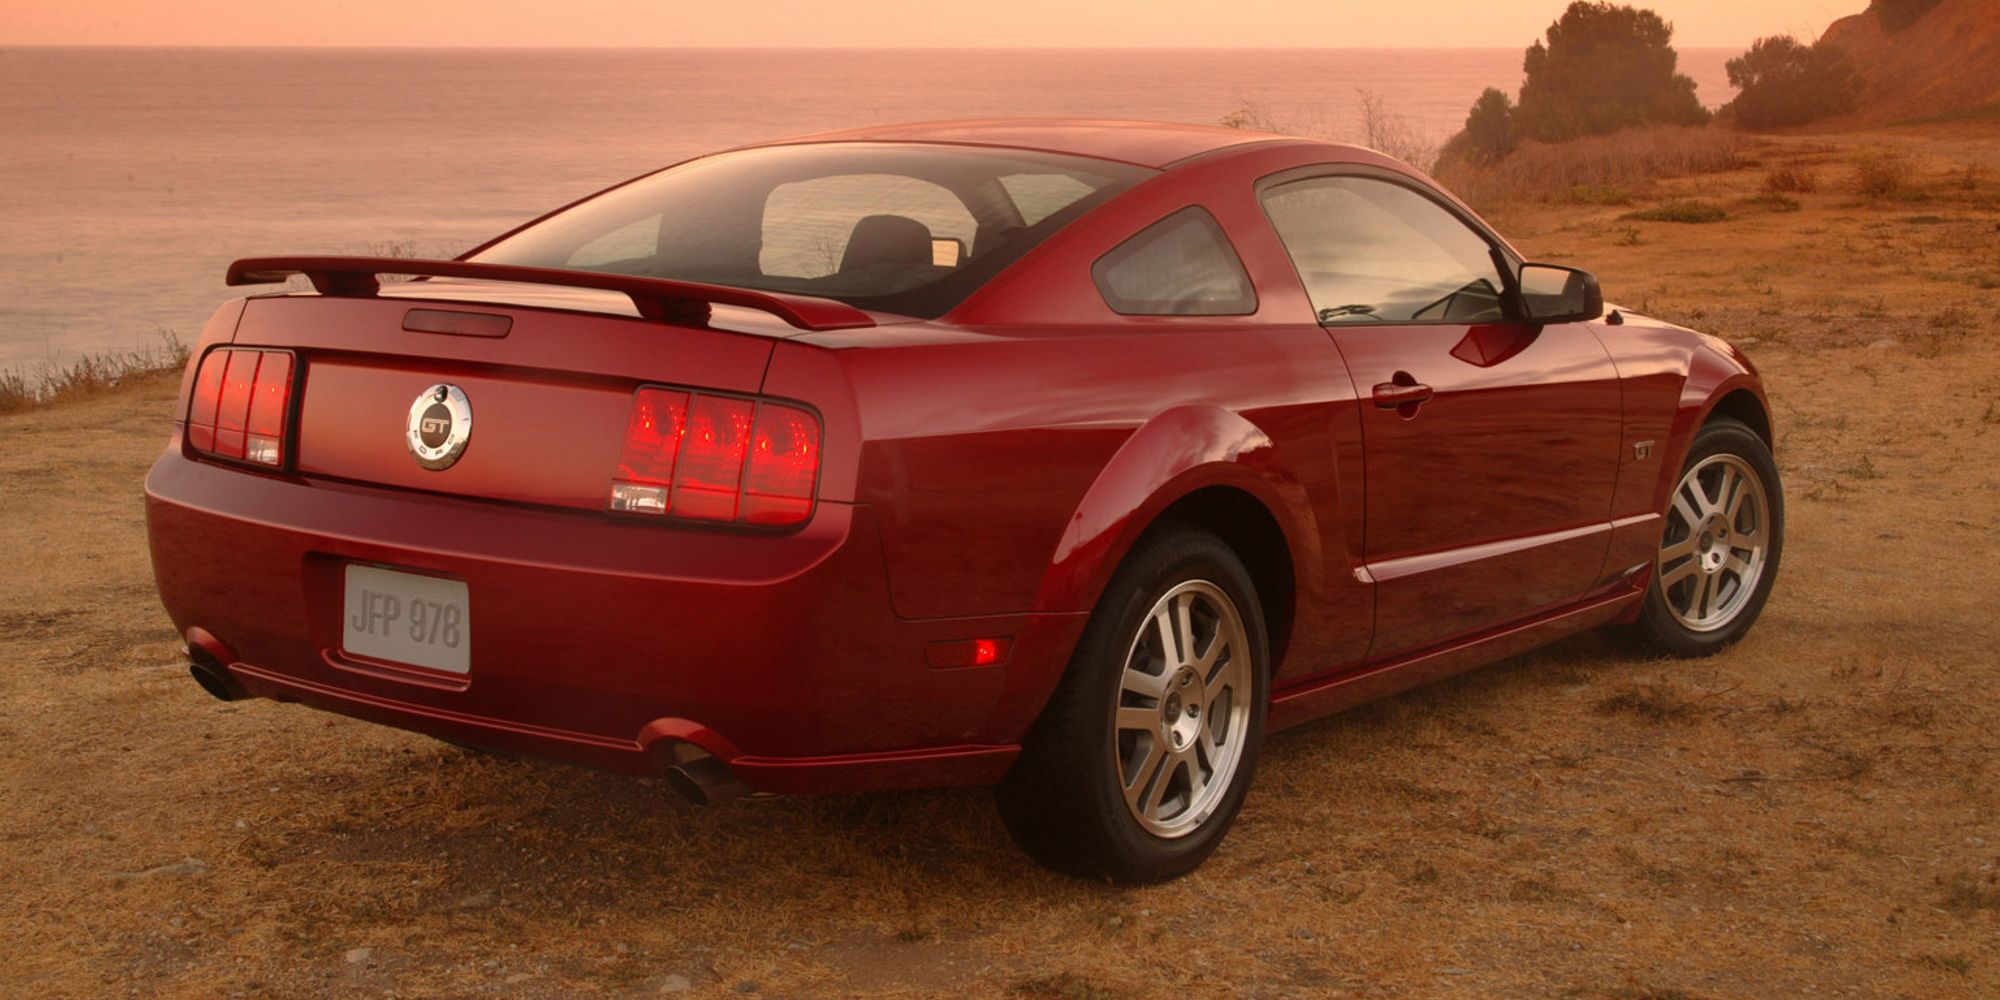 Rear 3/4 view of a red S-197 Mustang